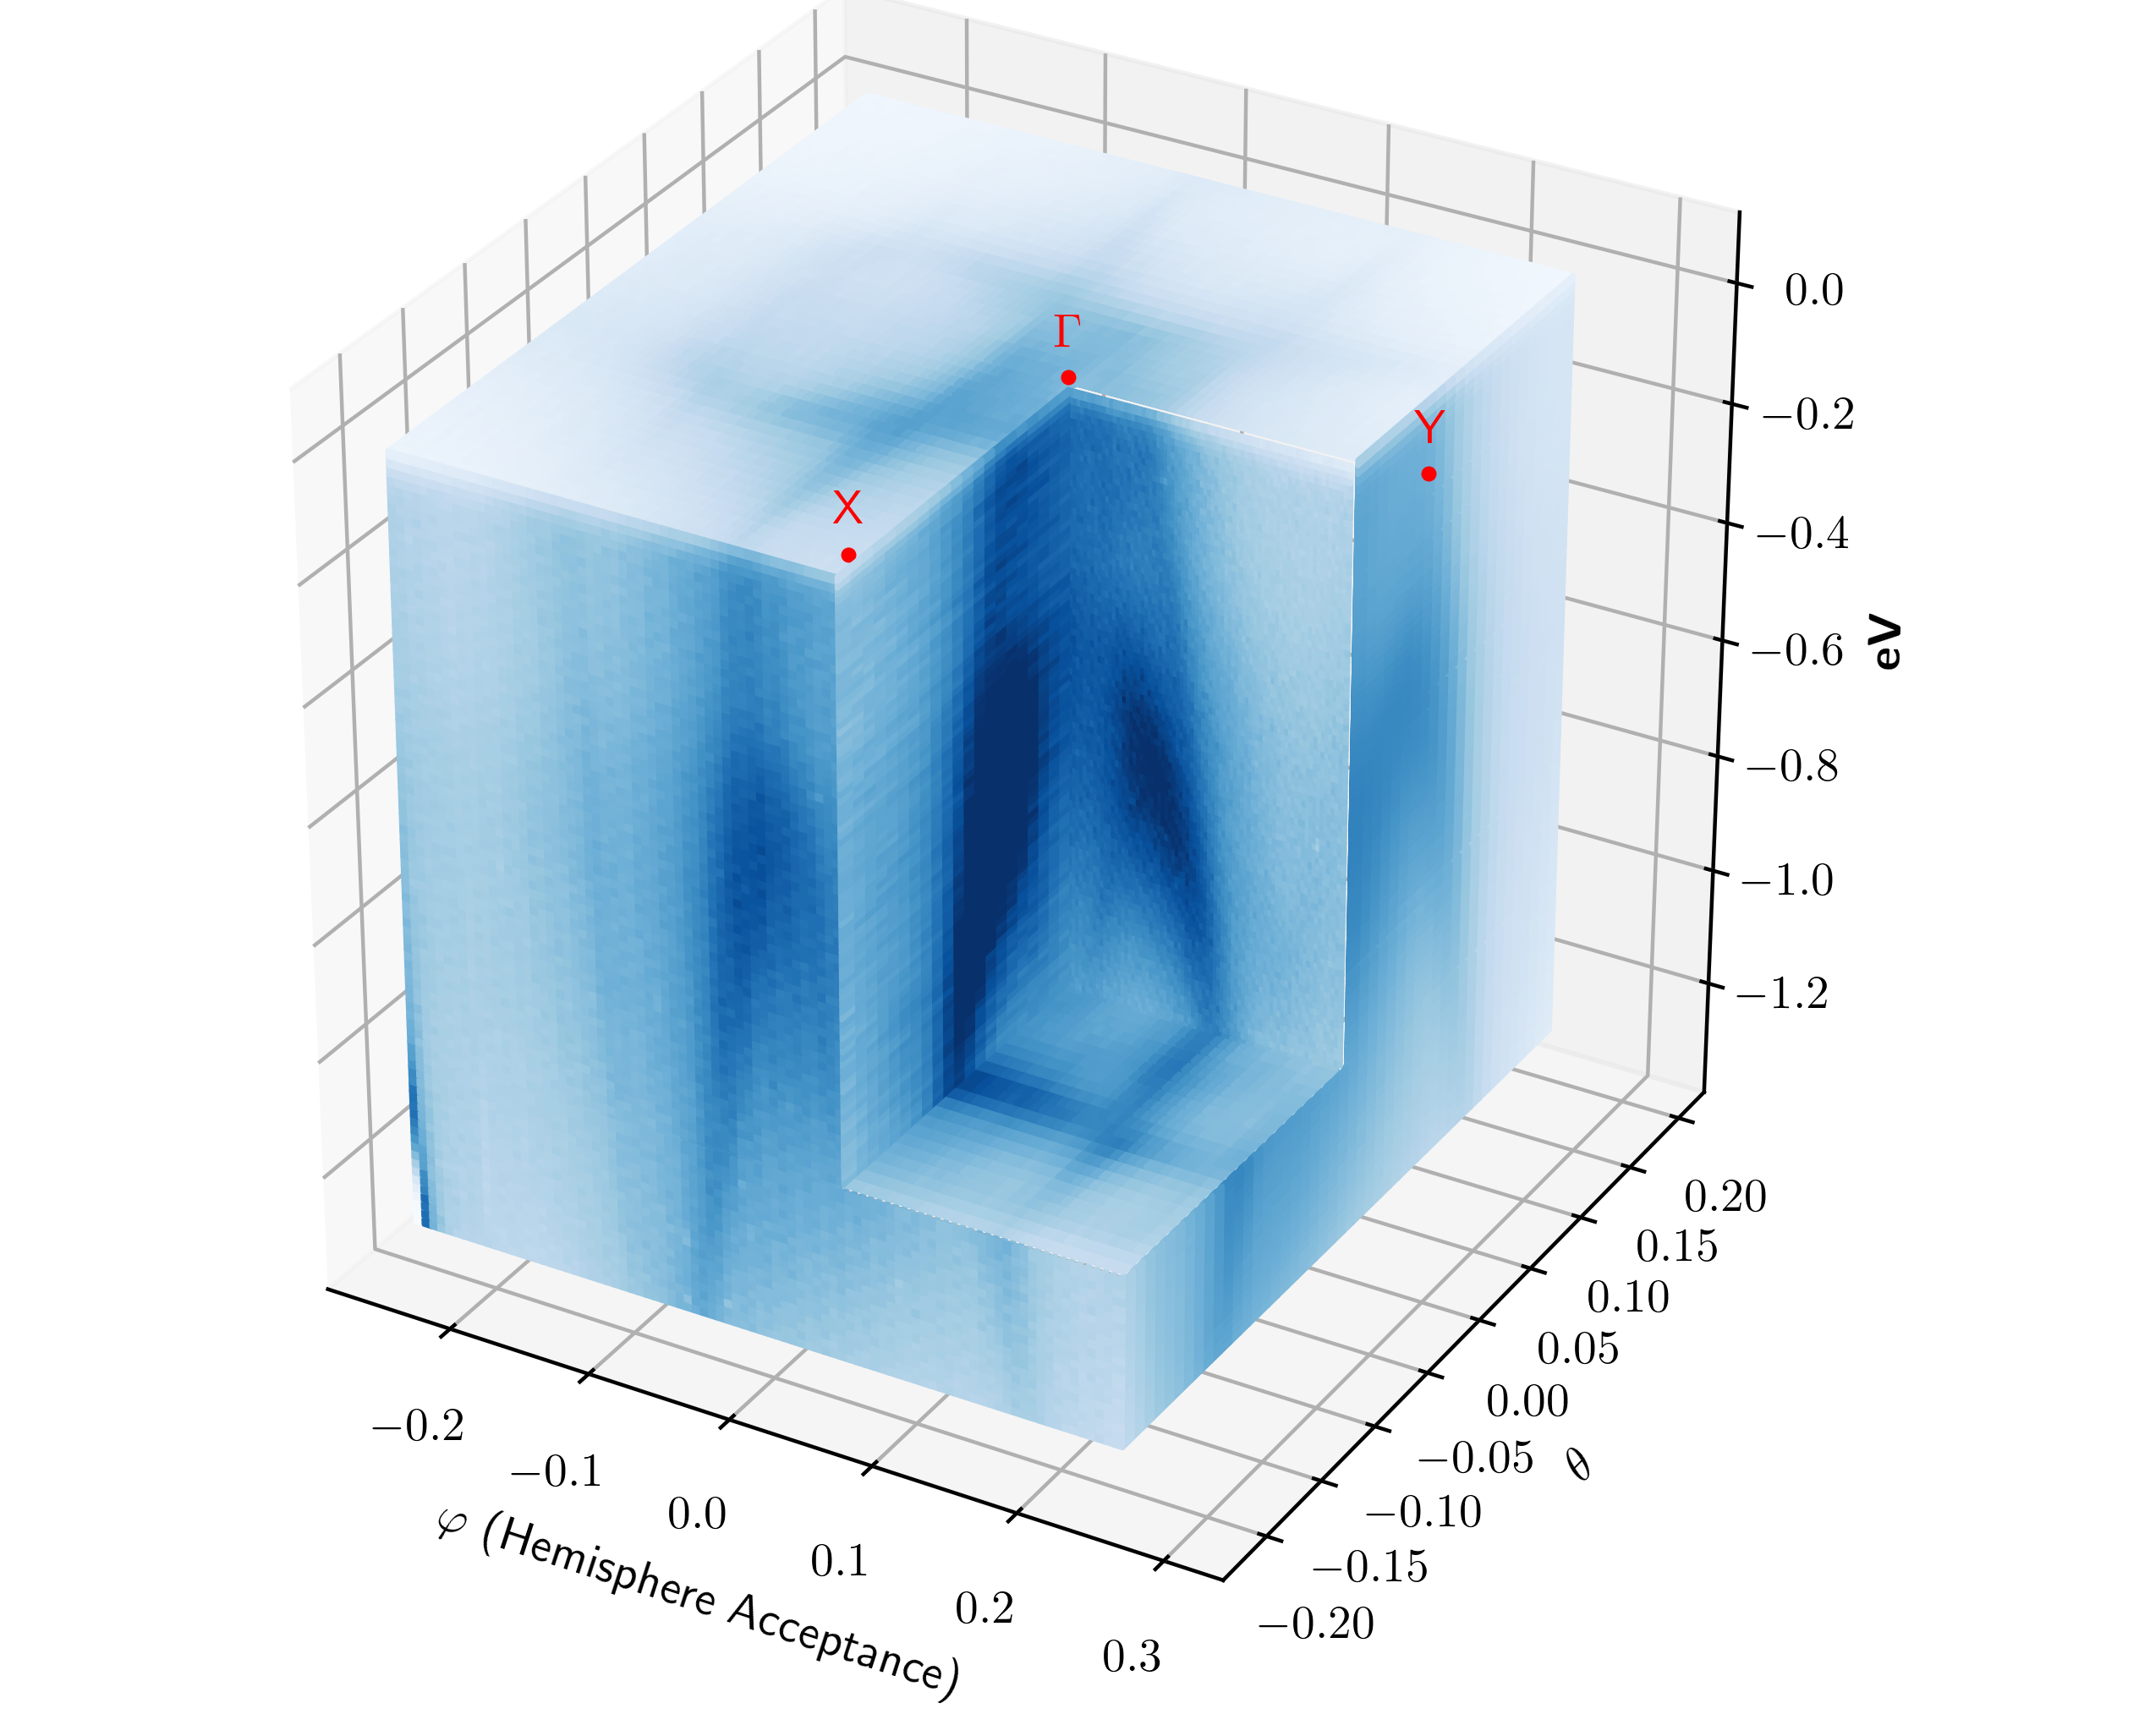 3D cut plot of a sample with orthorhombic symmetry